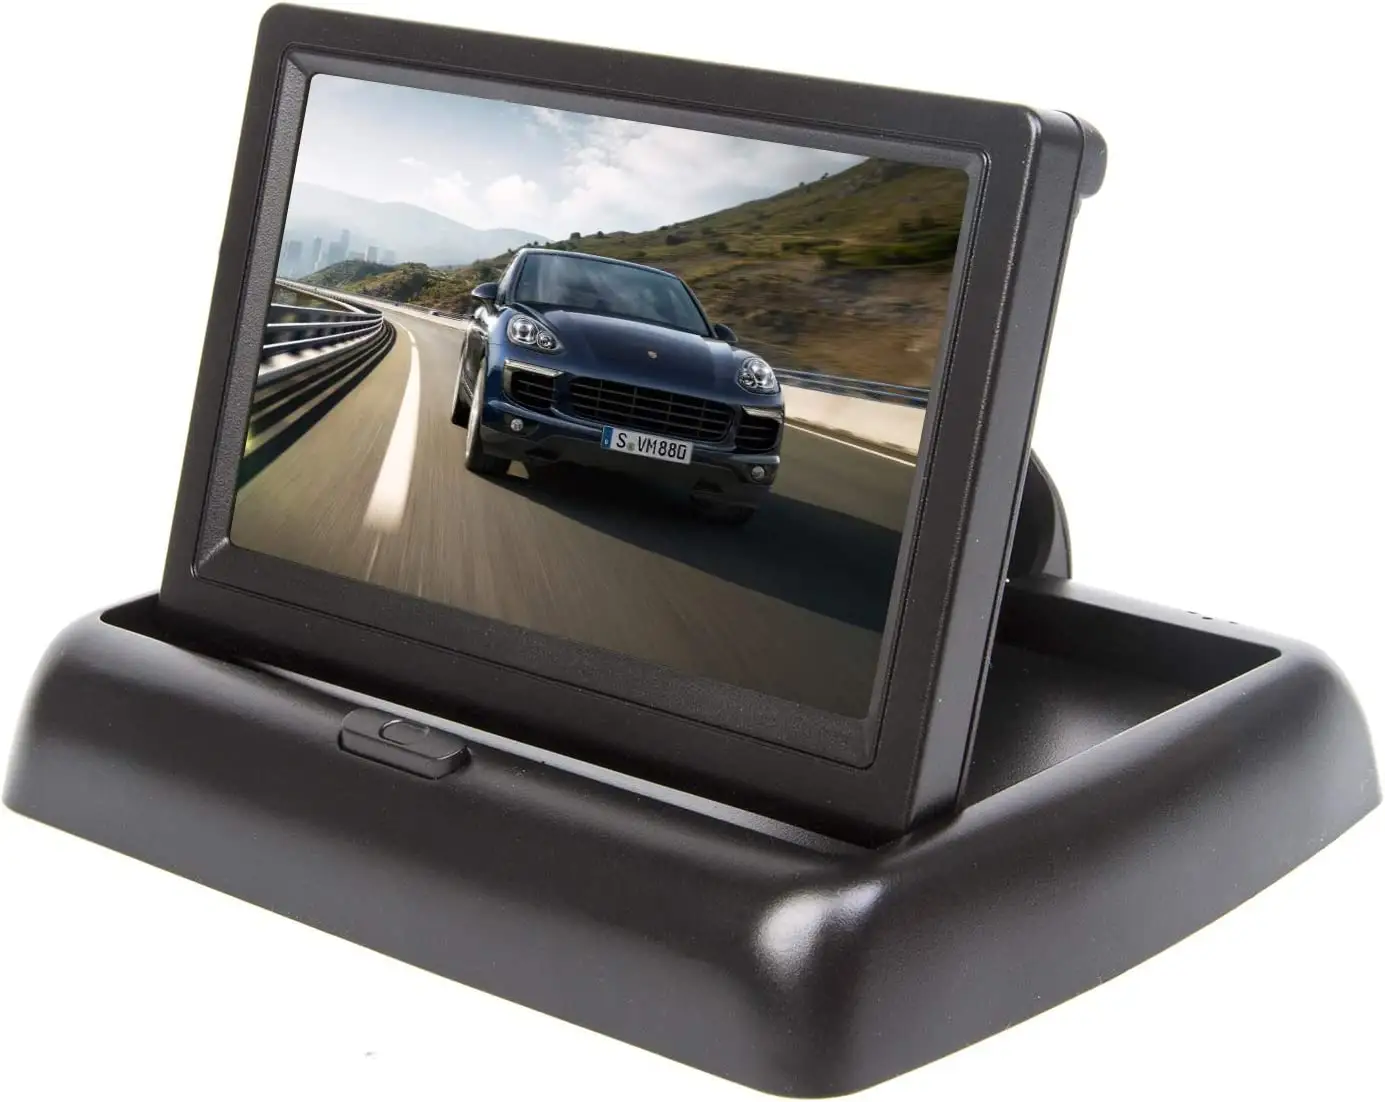 4.3 Inch Small Mini Digital Flip Down Foldable Monitor Screen for Car Truck Vehicle Rear View Reverse Parking Kits